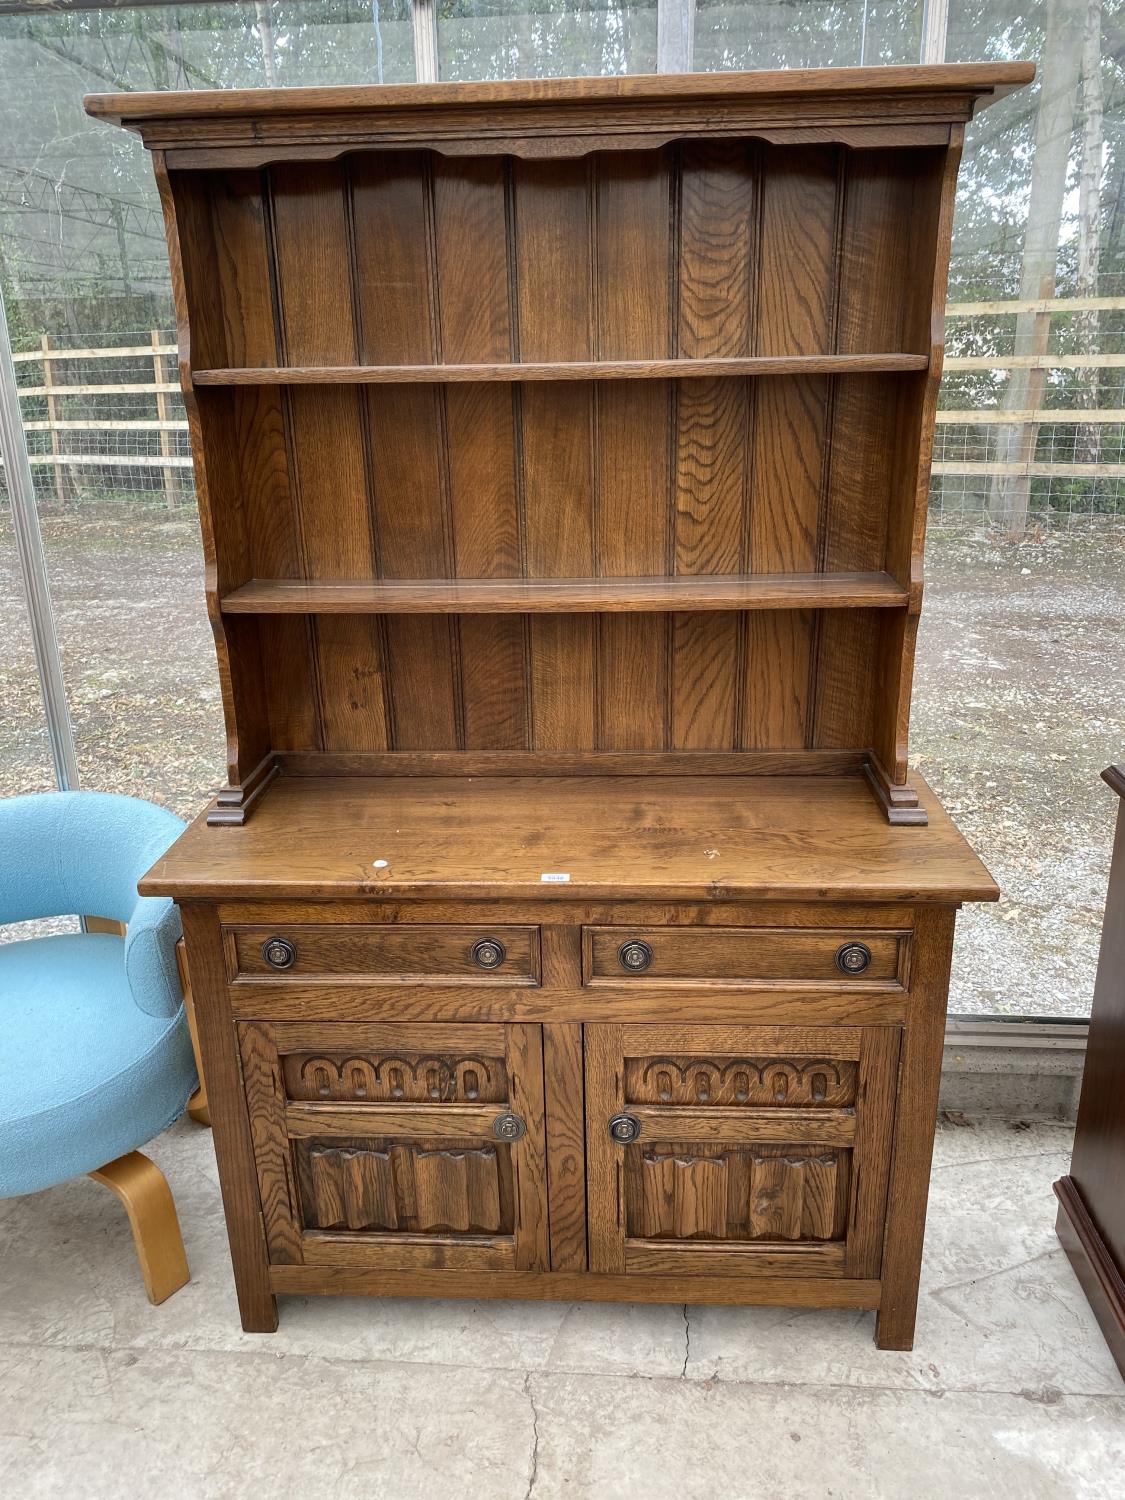 AN OAK WELSH DRESSER WITH TWO DOORS, TWO DRAWERS AND UPPER PLATE RACK